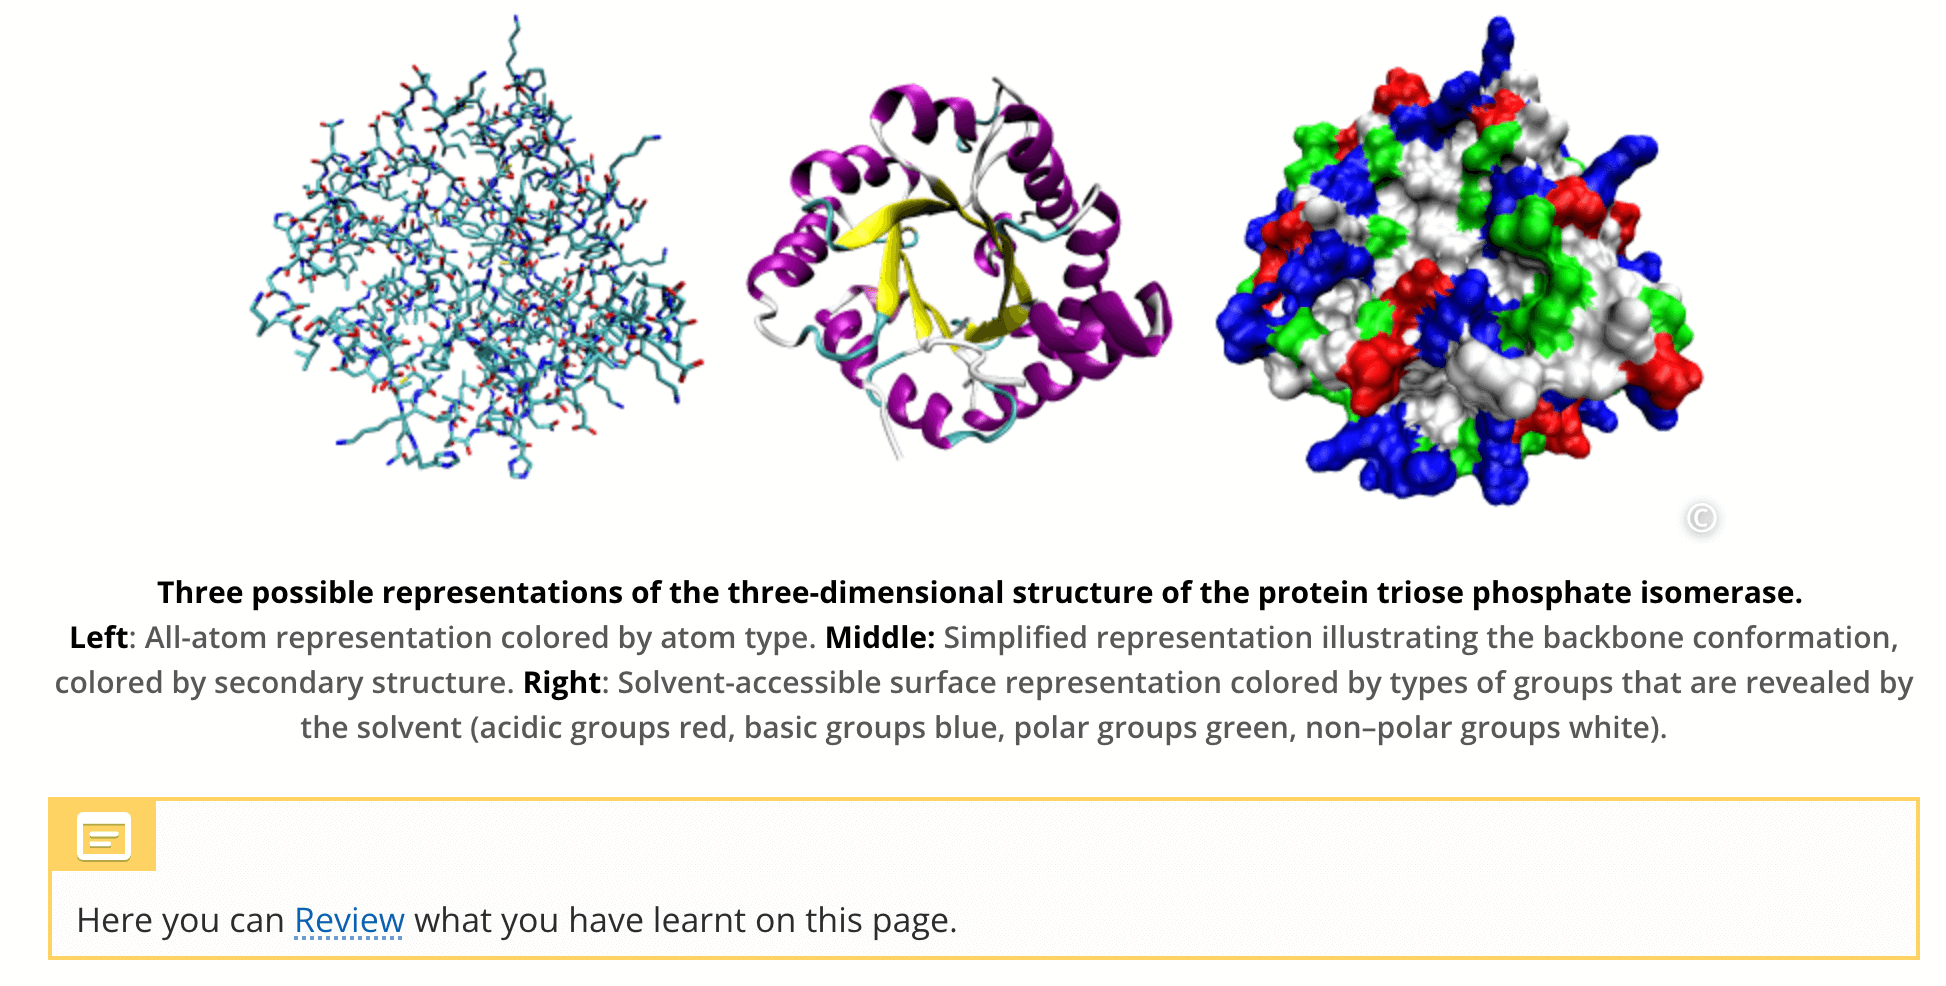 An image in Lt of three possible representations of the three-dimensional structure of the protein triose phosphate isomerase.